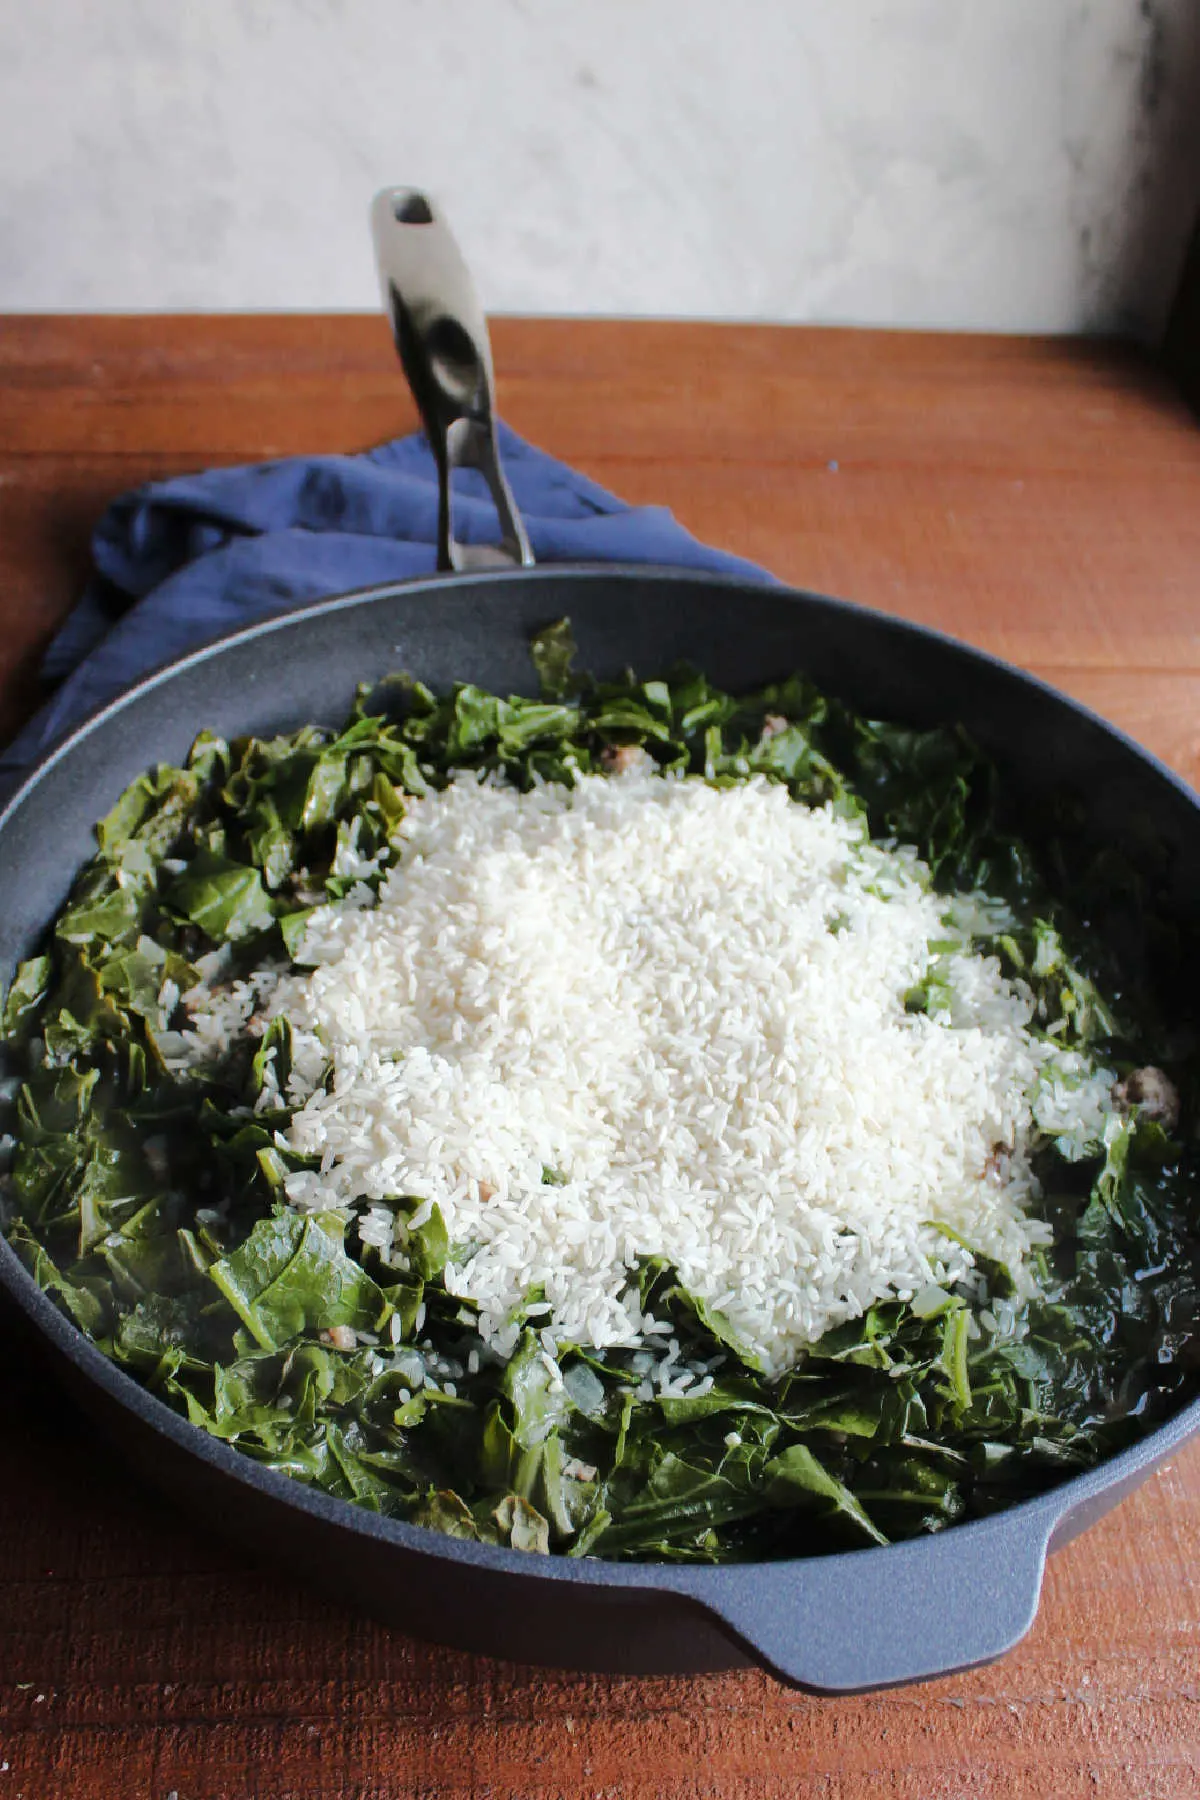 Rice on top of partially cooked collard greens that have now shrunk and easily fit inside the pan.